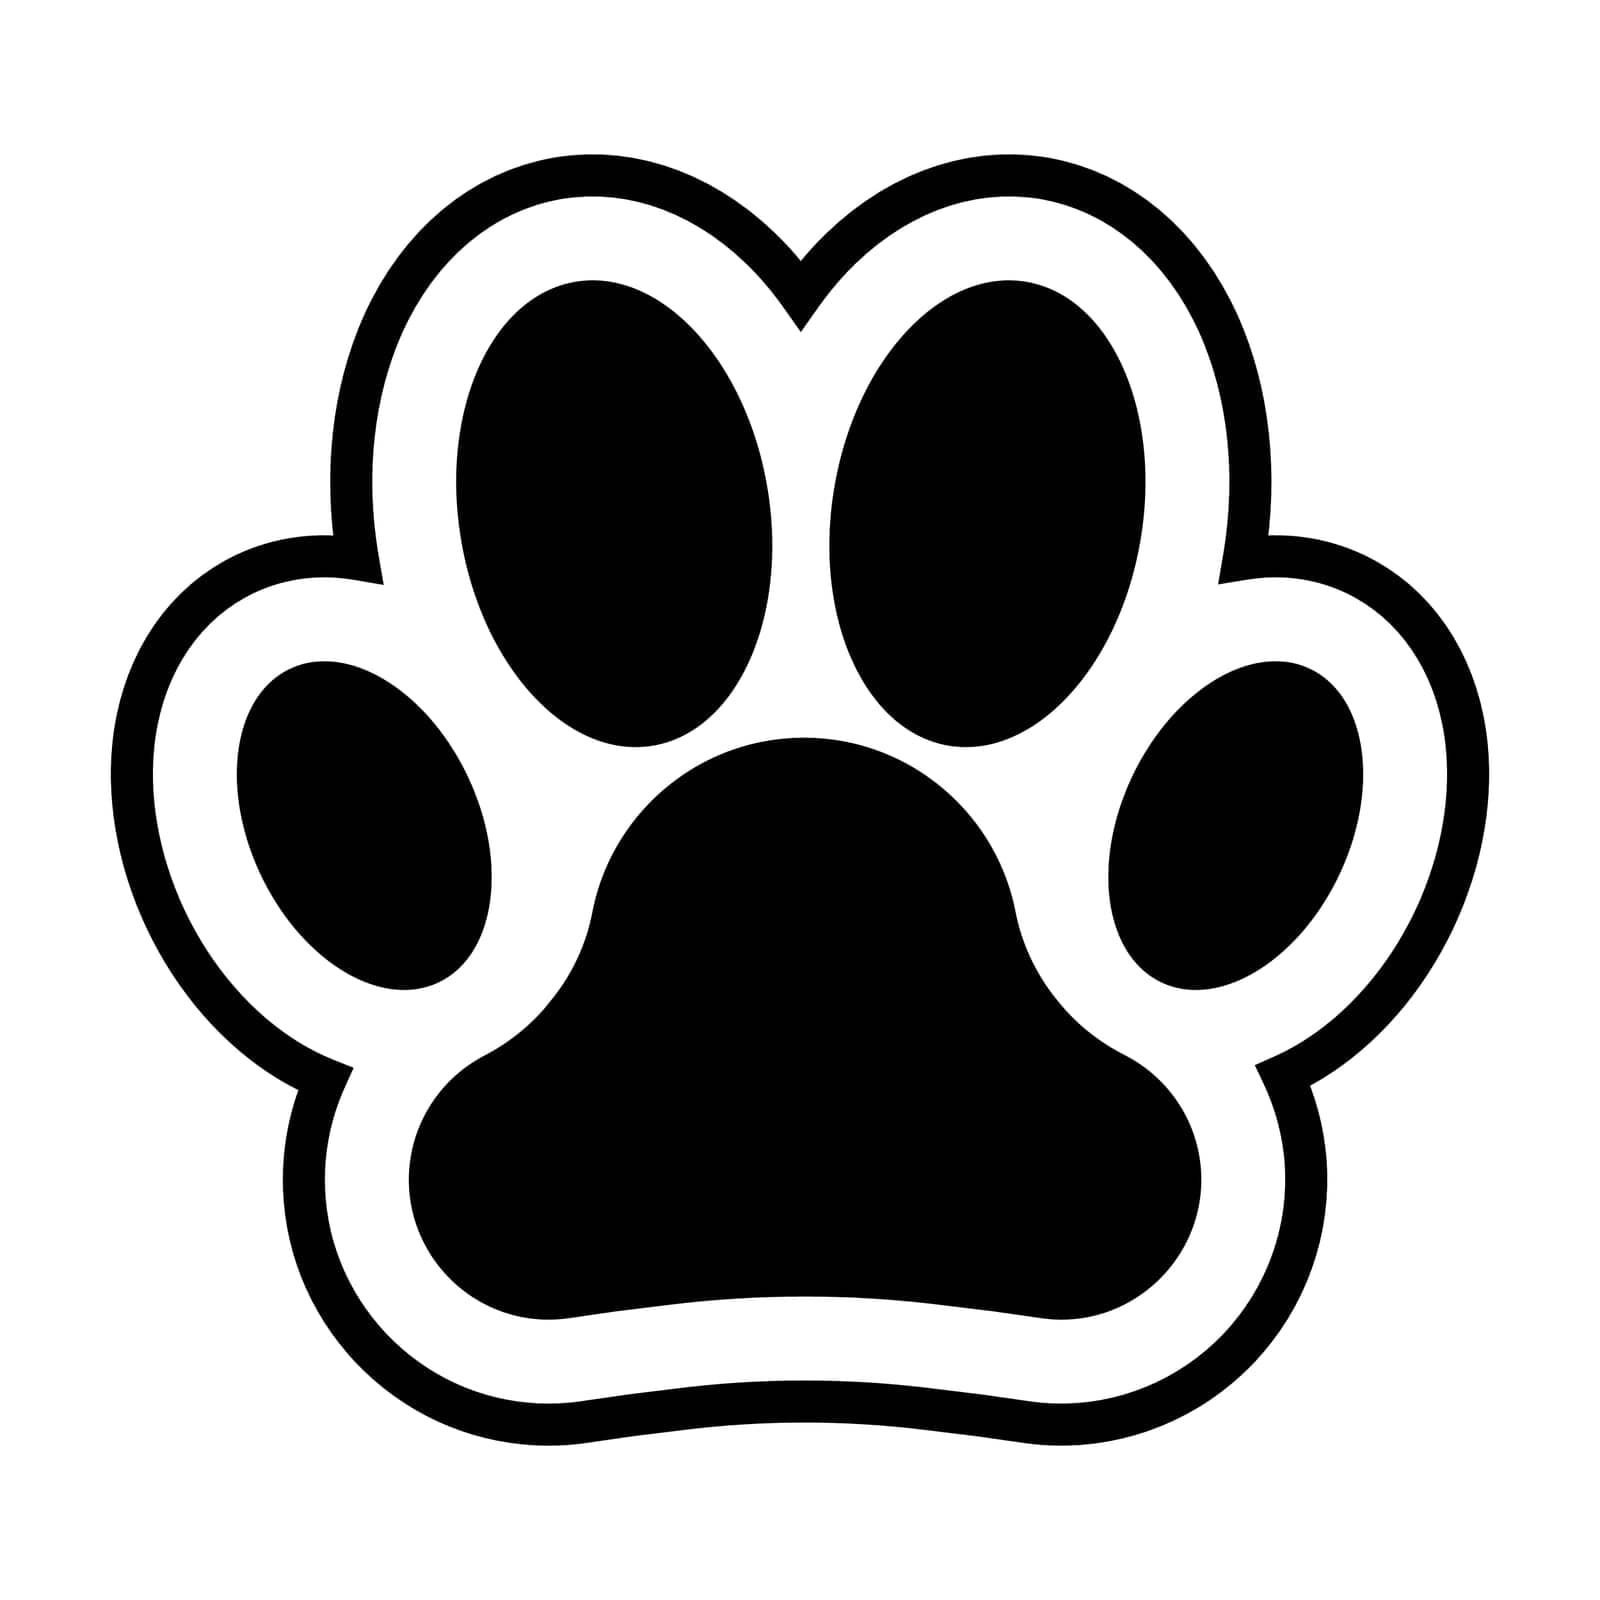 Paw print icon simple design by misteremil